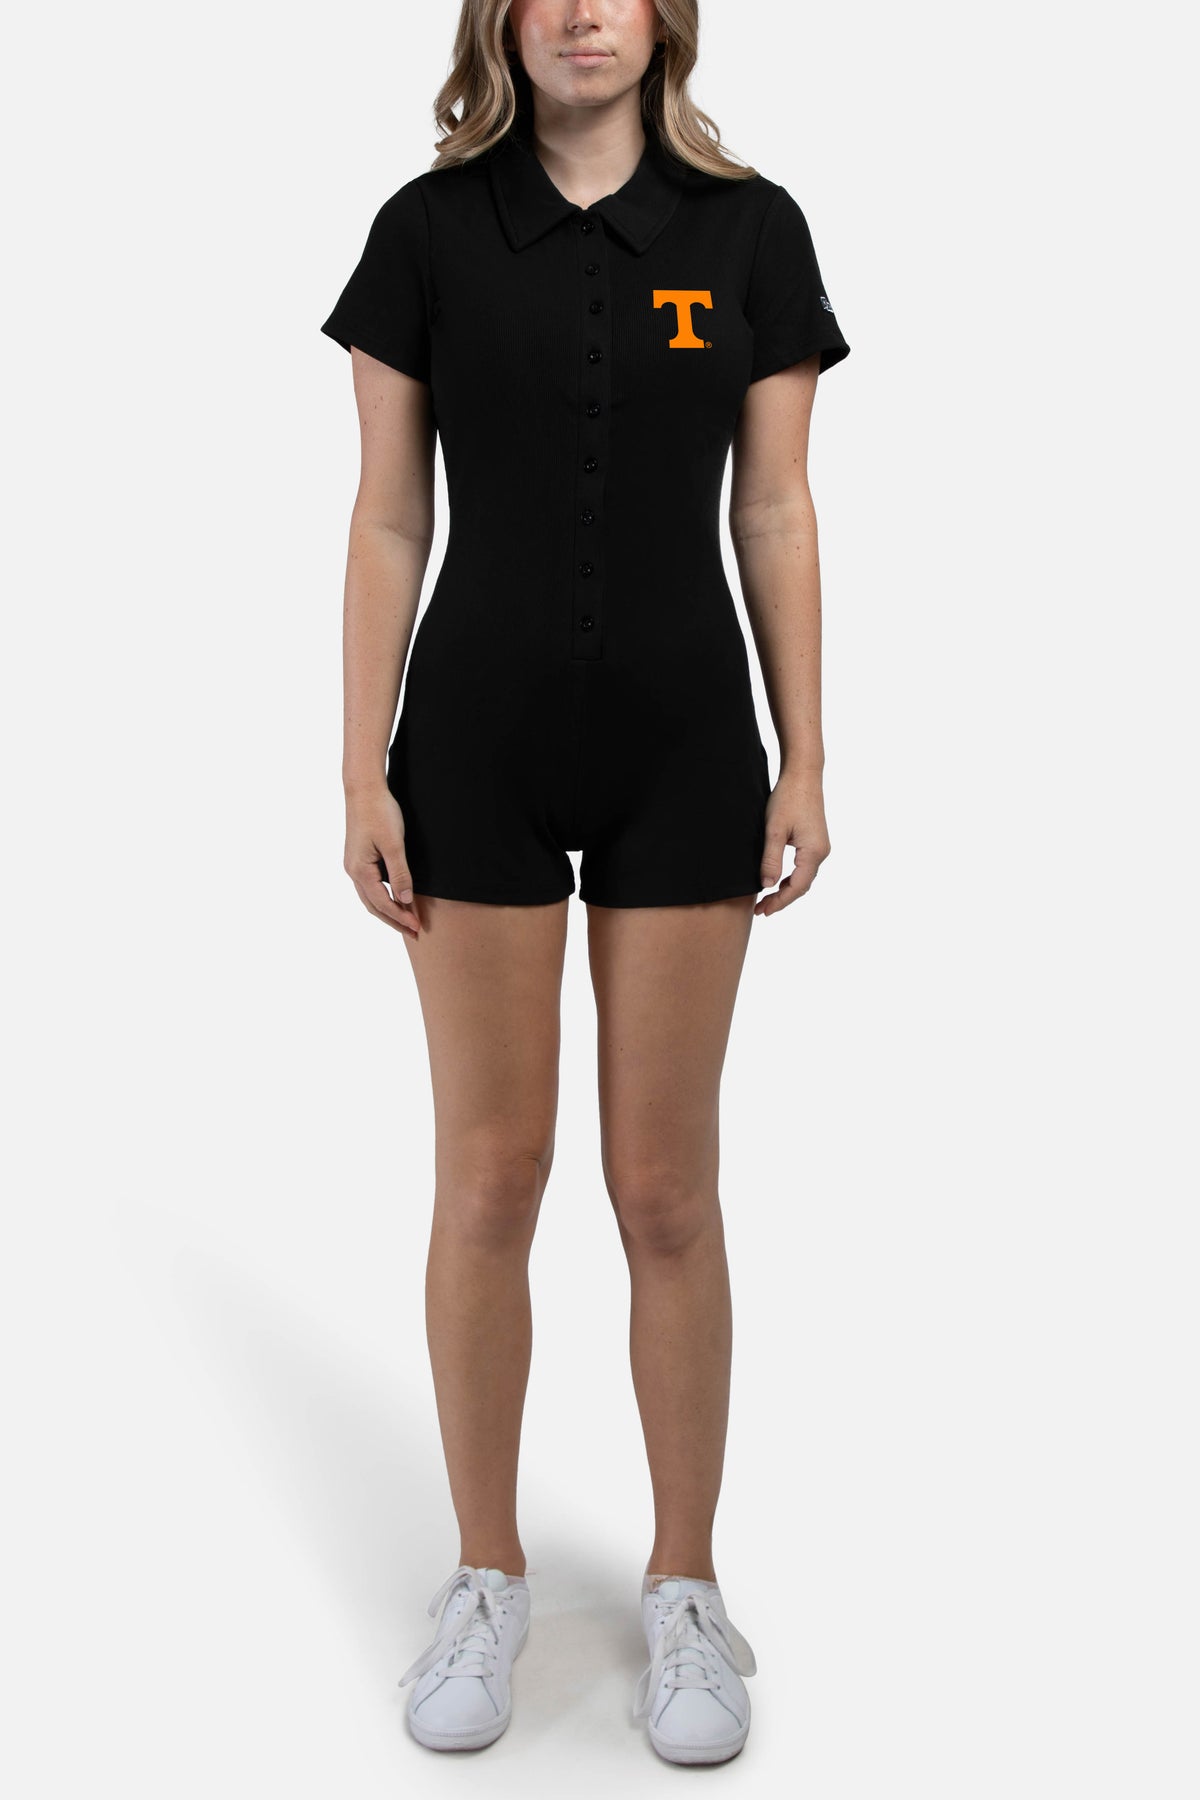 University of Tennessee Gameday Romper